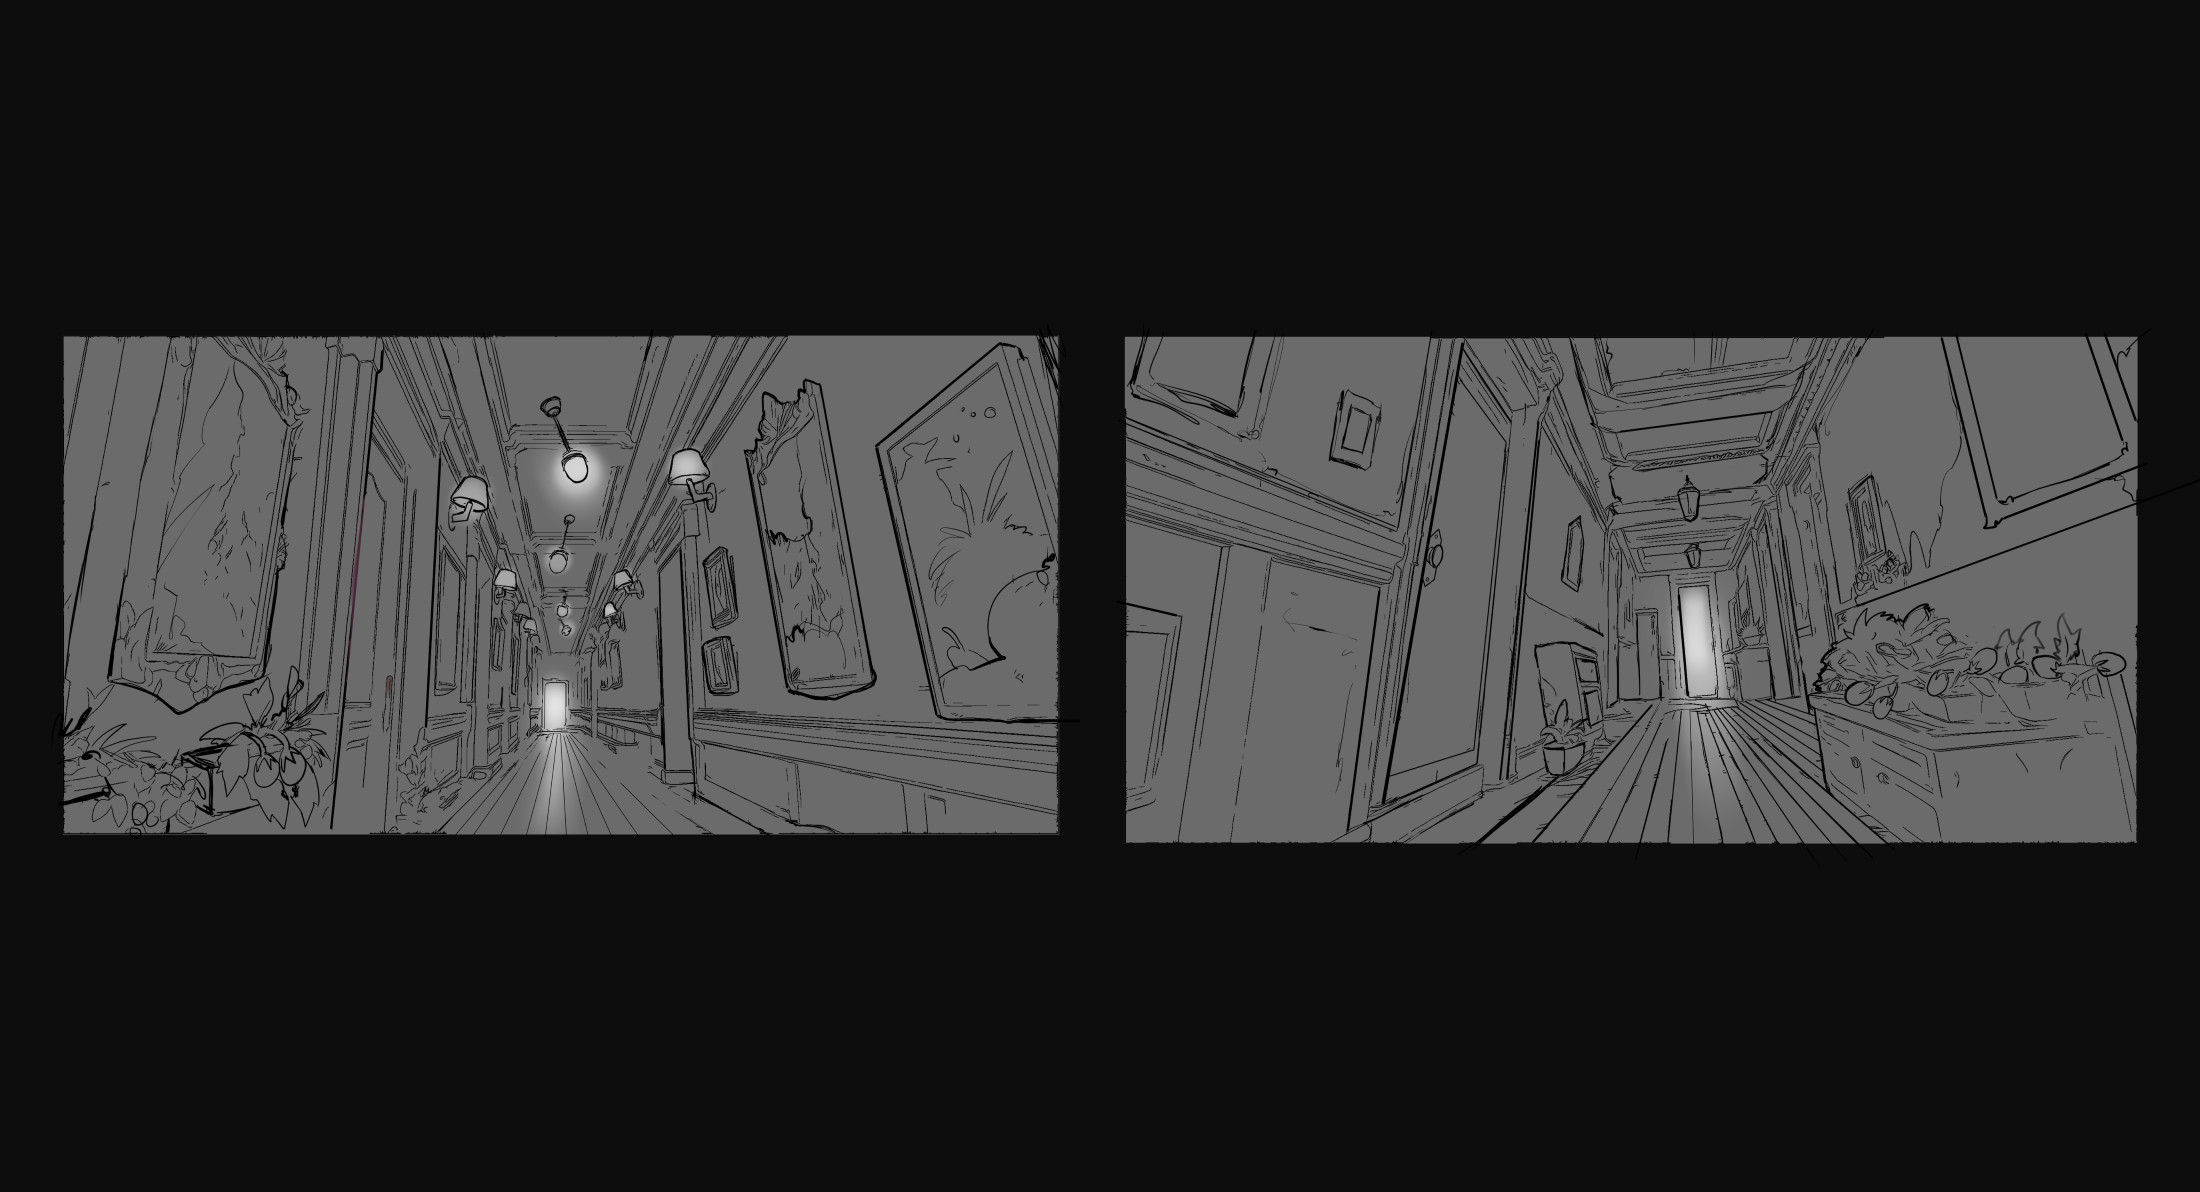 Composition sketches for the Distorted dream hallway